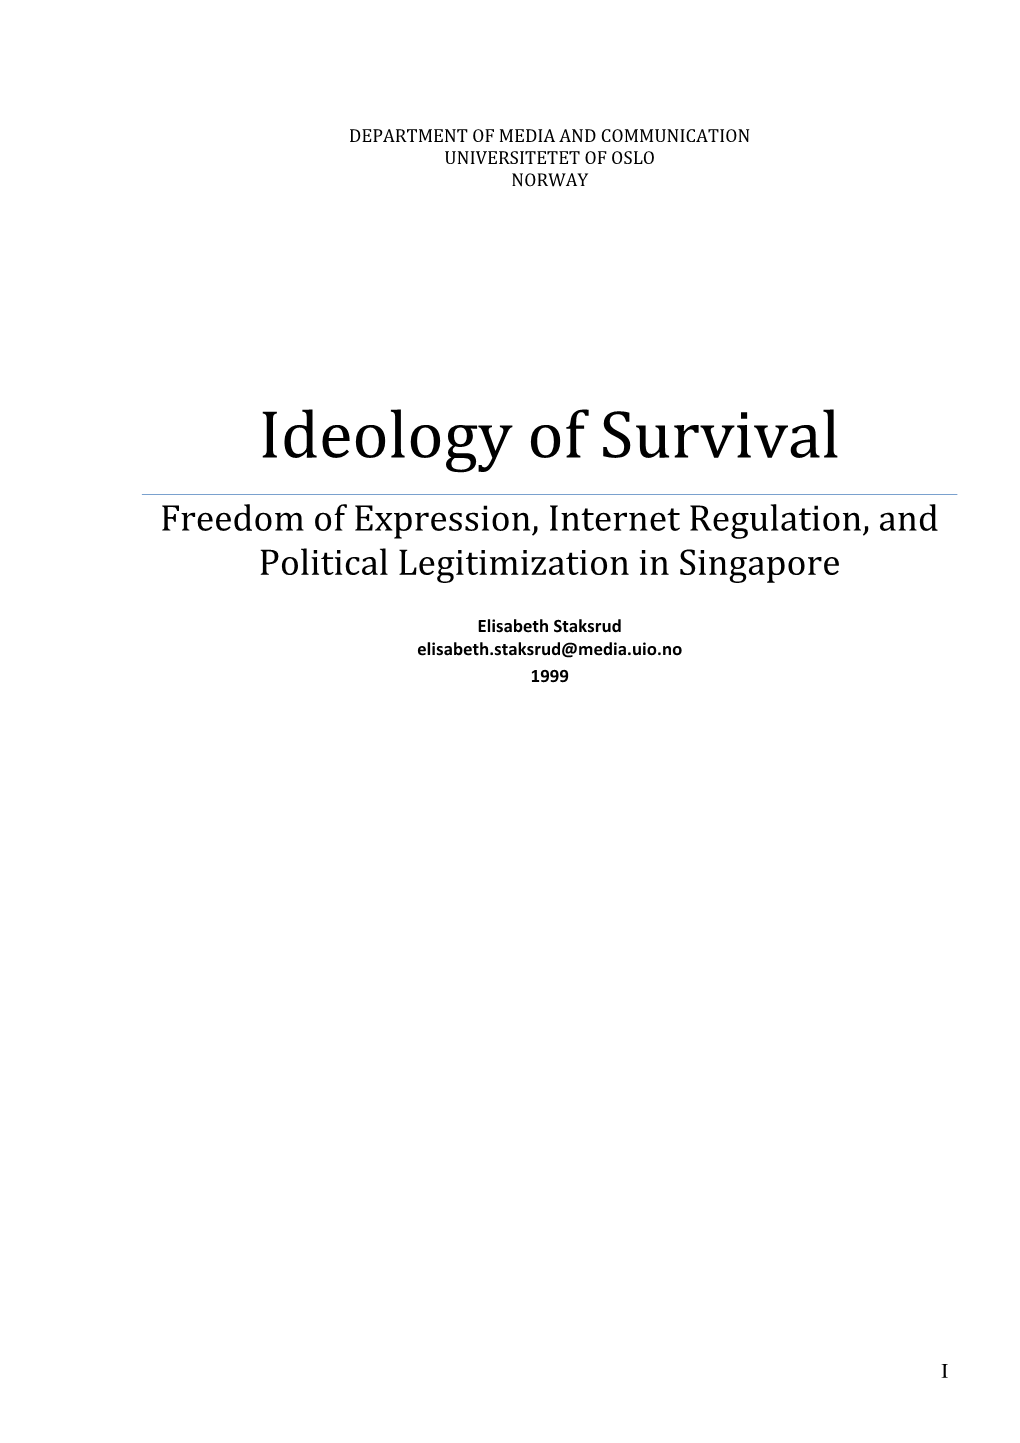 Ideology of Survival Freedom of Expression, Internet Regulation, and Political Legitimization in Singapore